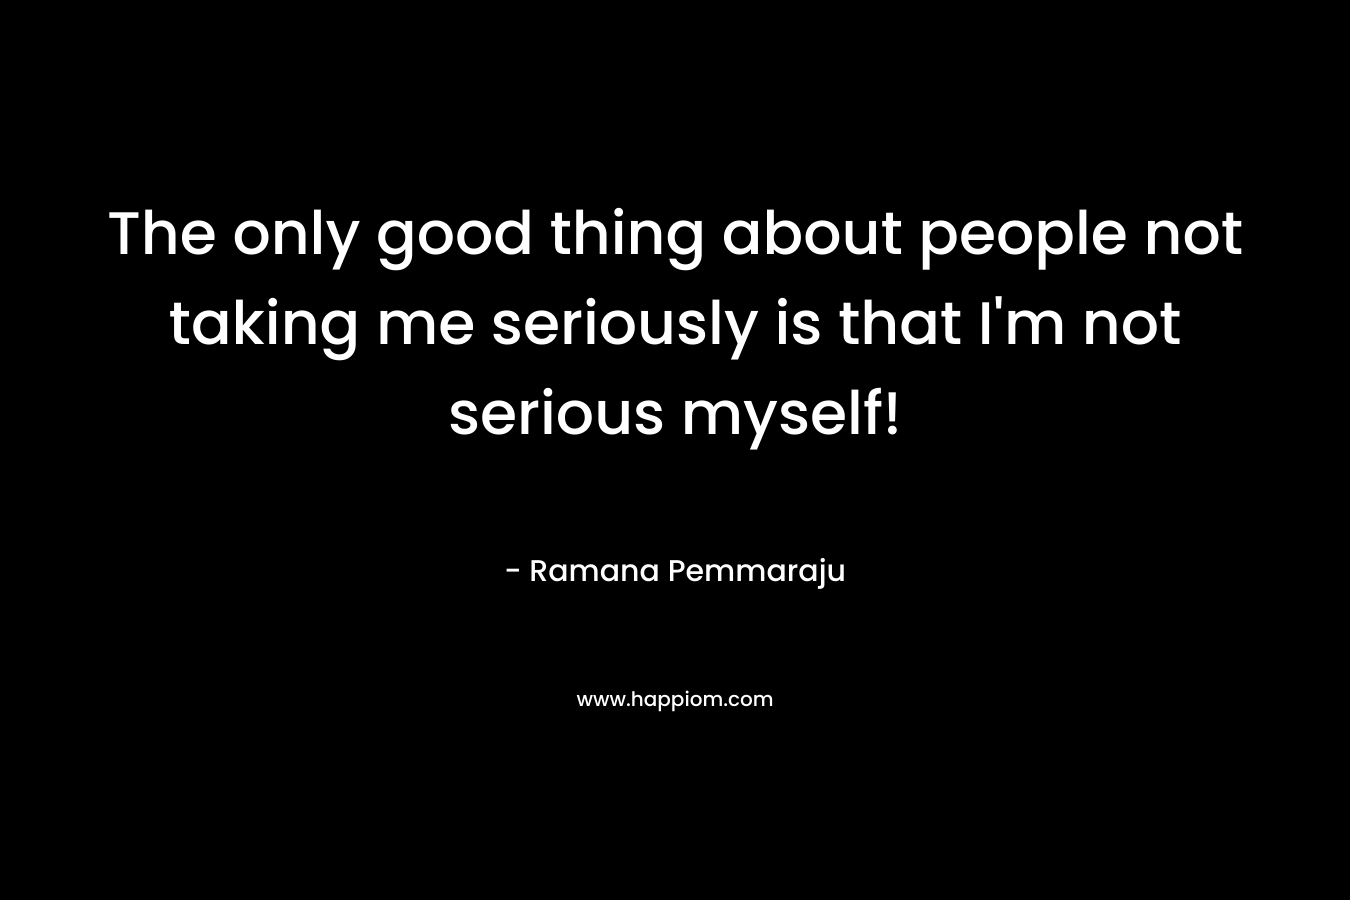 The only good thing about people not taking me seriously is that I’m not serious myself! – Ramana Pemmaraju